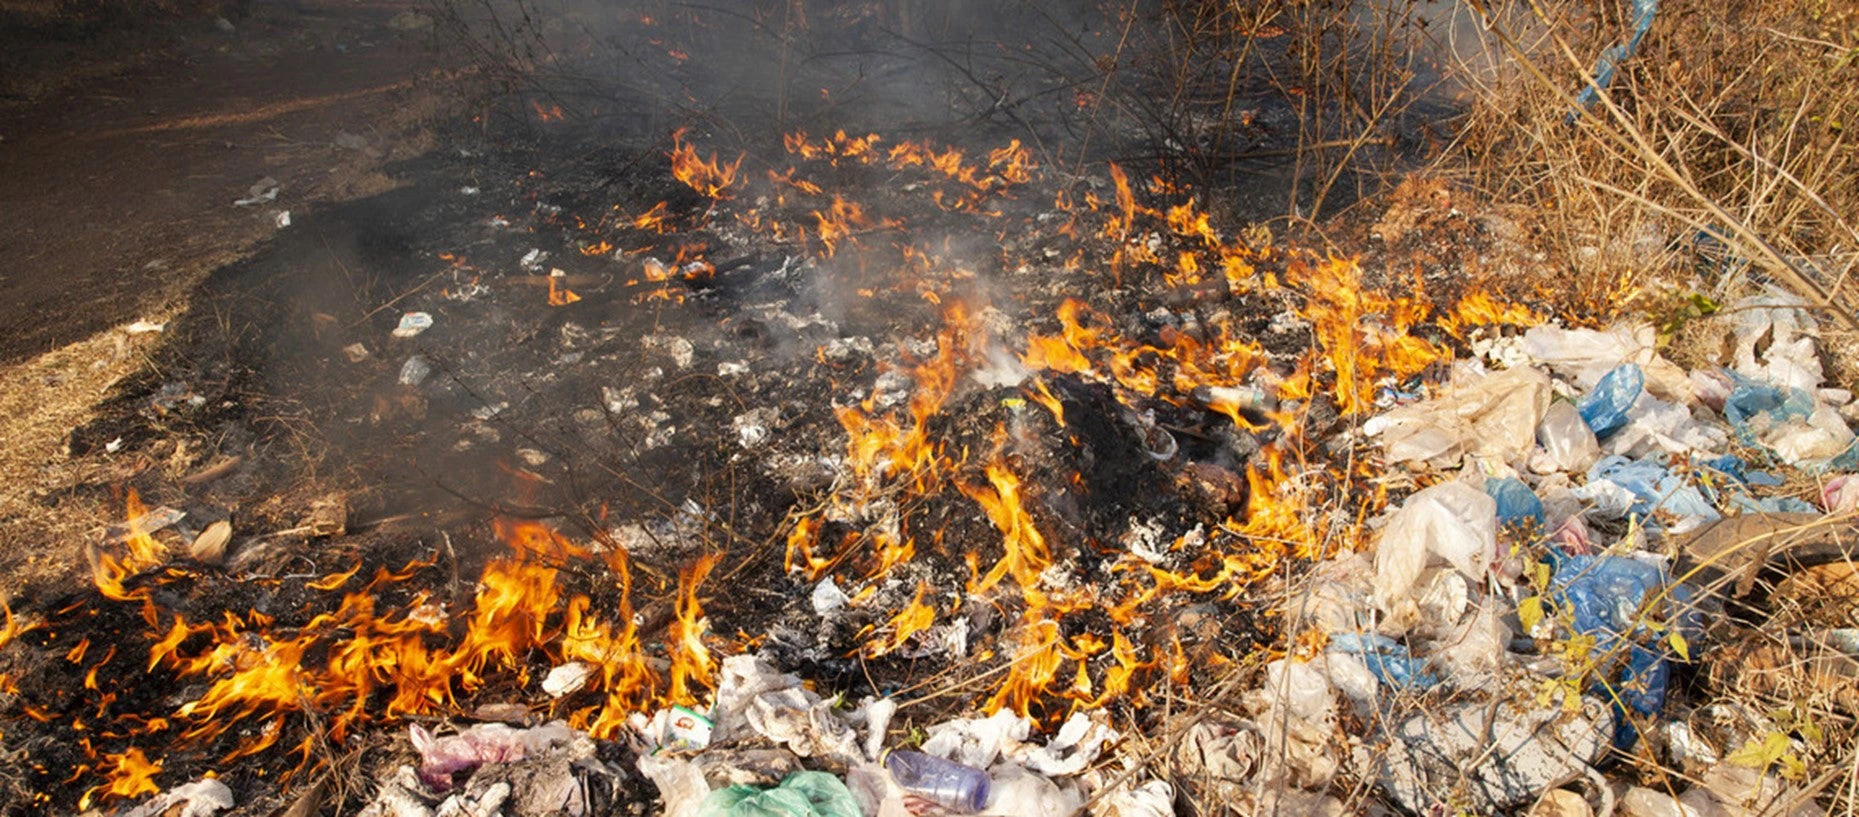 Open burning of waste has severe health, environmental, and economic consequences.        Photo: Xaisongkham Induangchanthy/World Bank